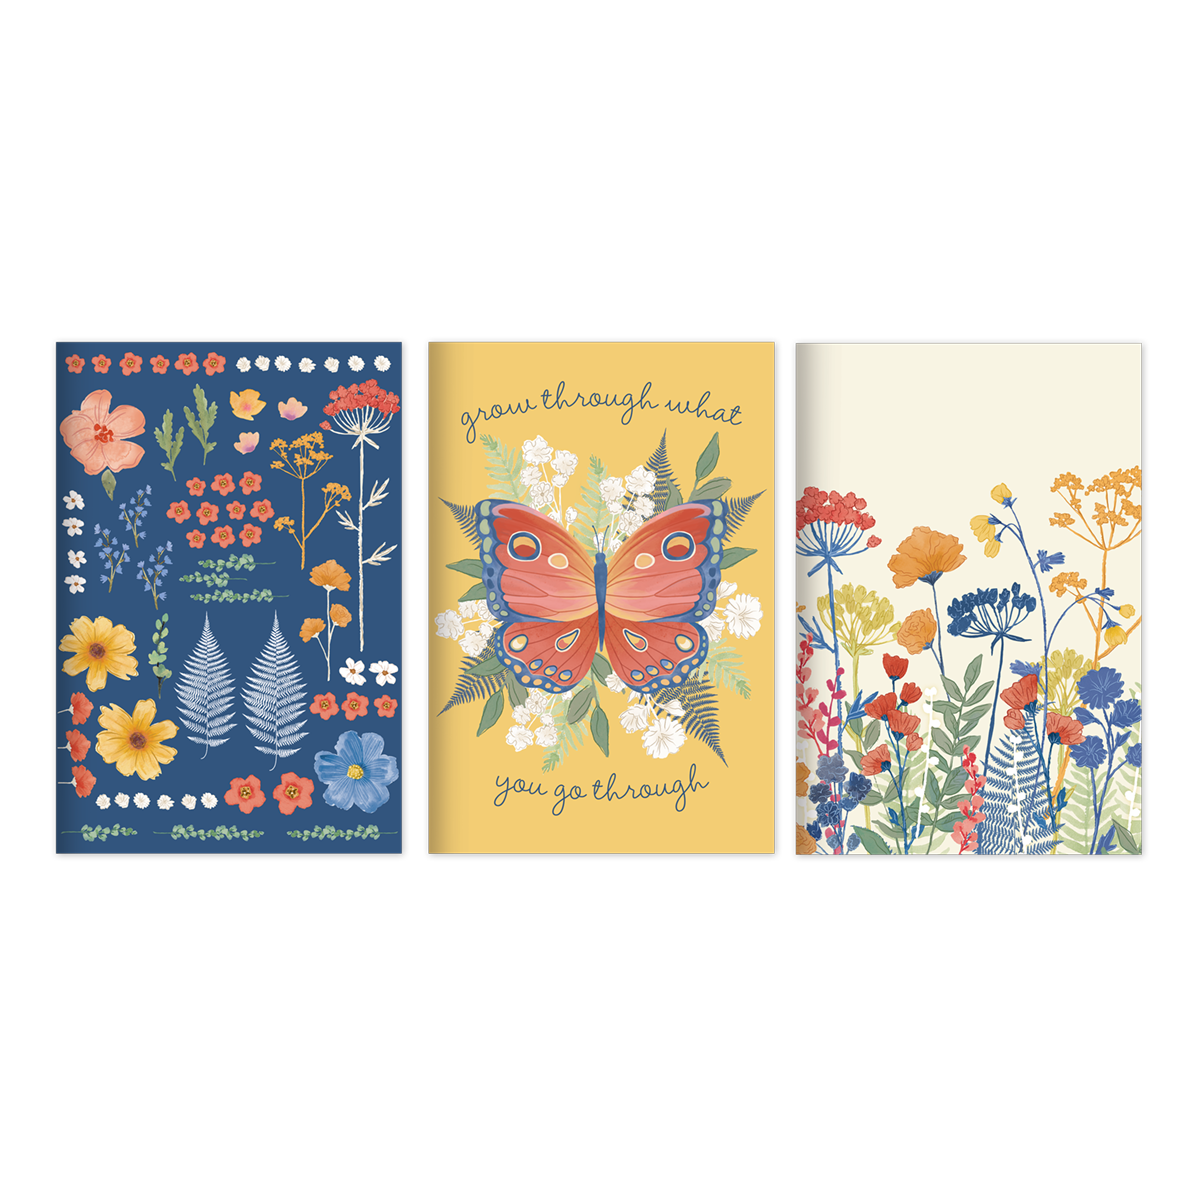 3 notebooks in a row, 1 is blue with floral design, 1 is yellow with butterfly and flowers, 1 is cream with wildflower design.